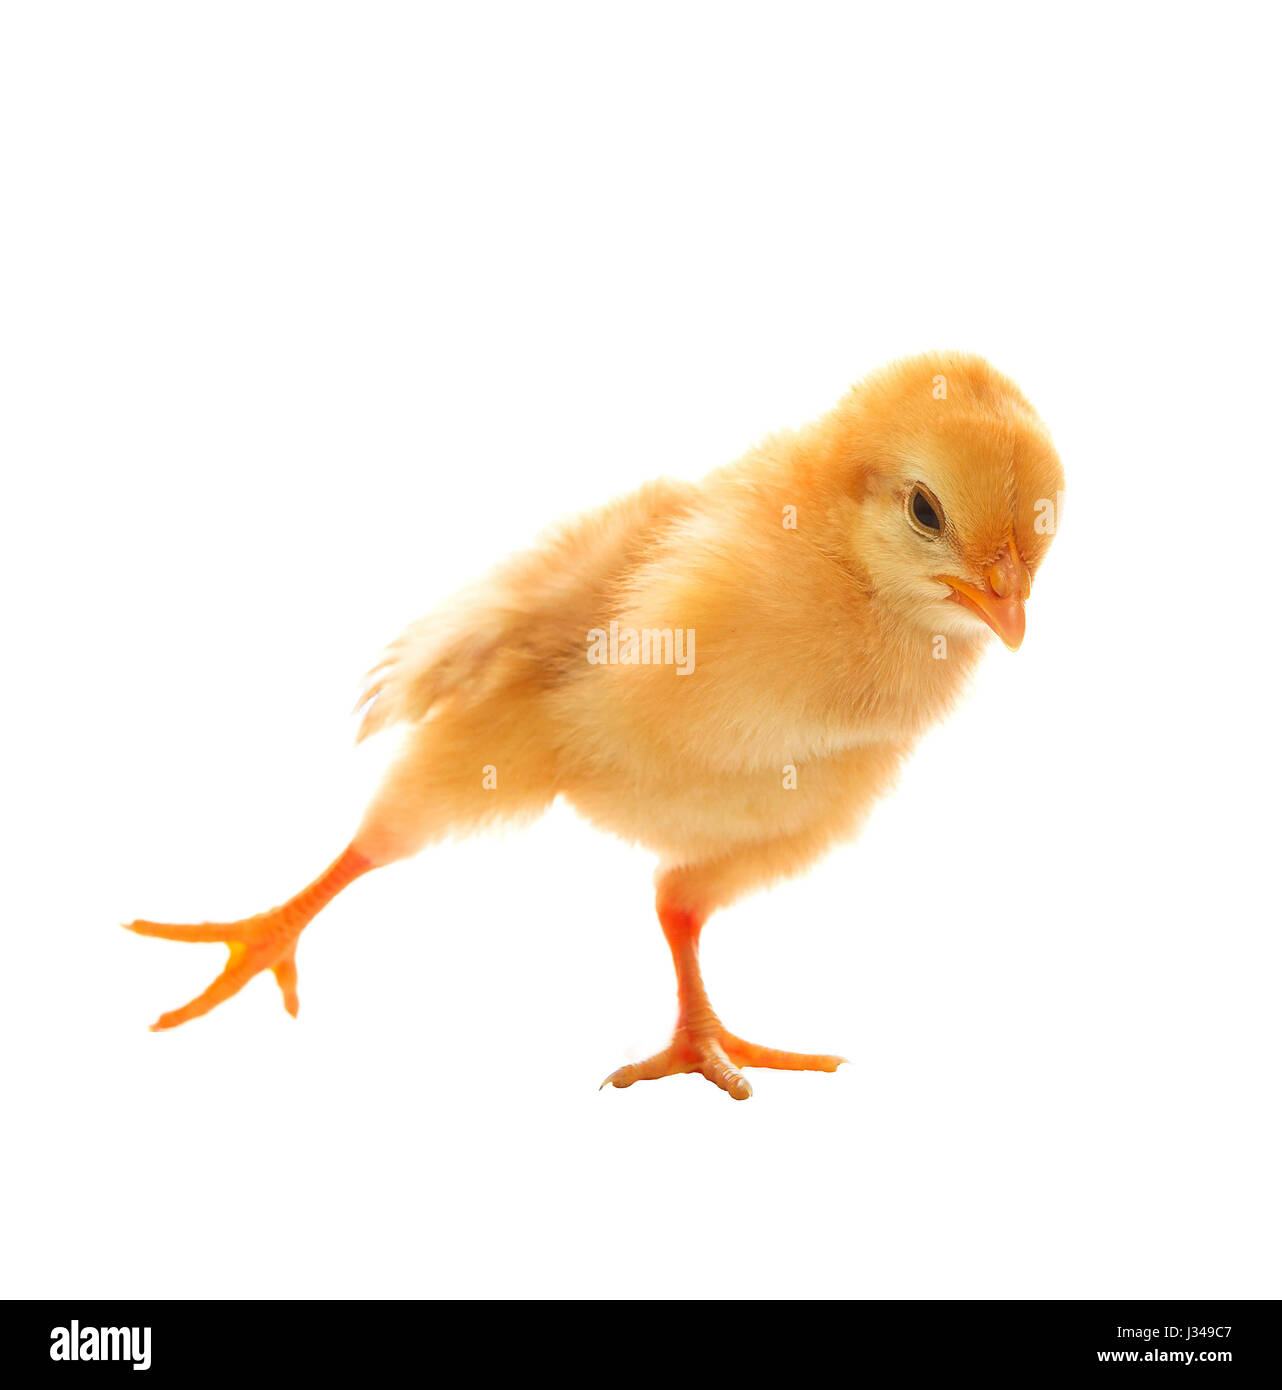 little yellow young baby chick excercise yoka isolated on white background Stock Photo